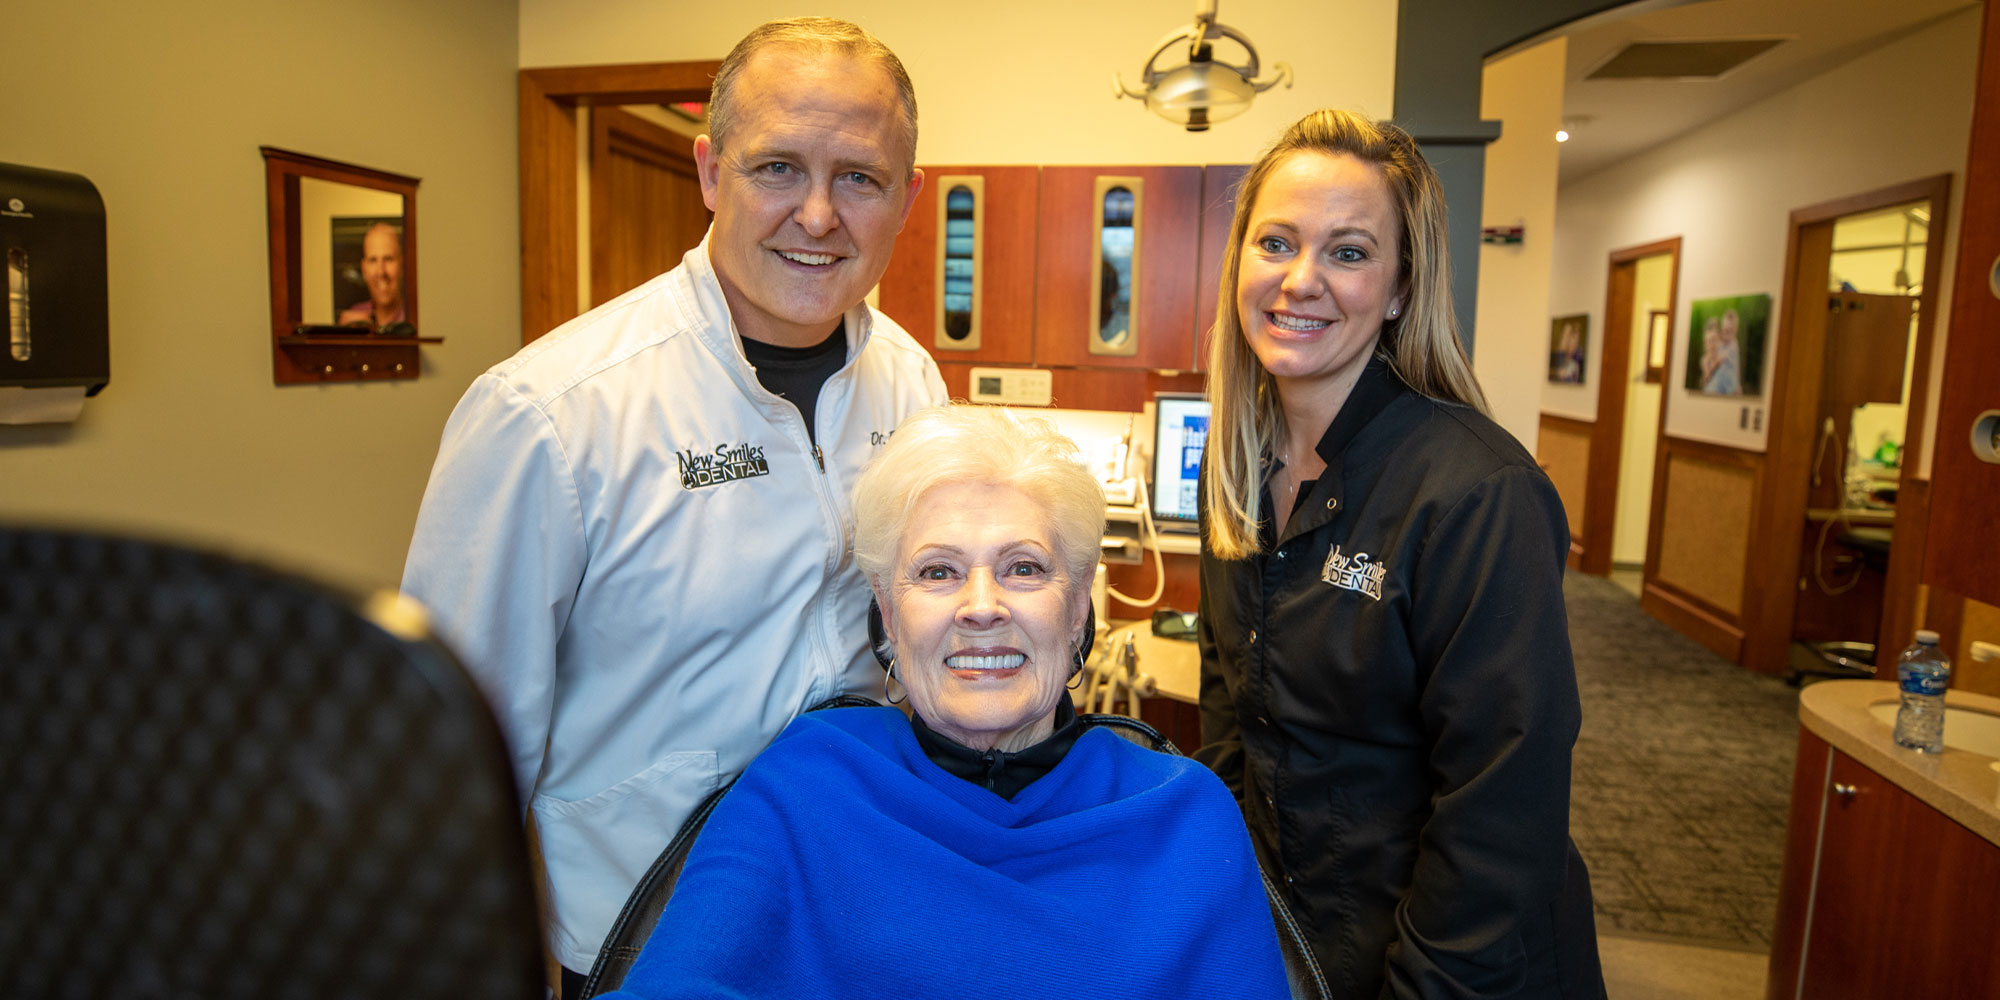 Dr. Nathan Doyel and staff member smiling with a dental patient after her dental implant procedure